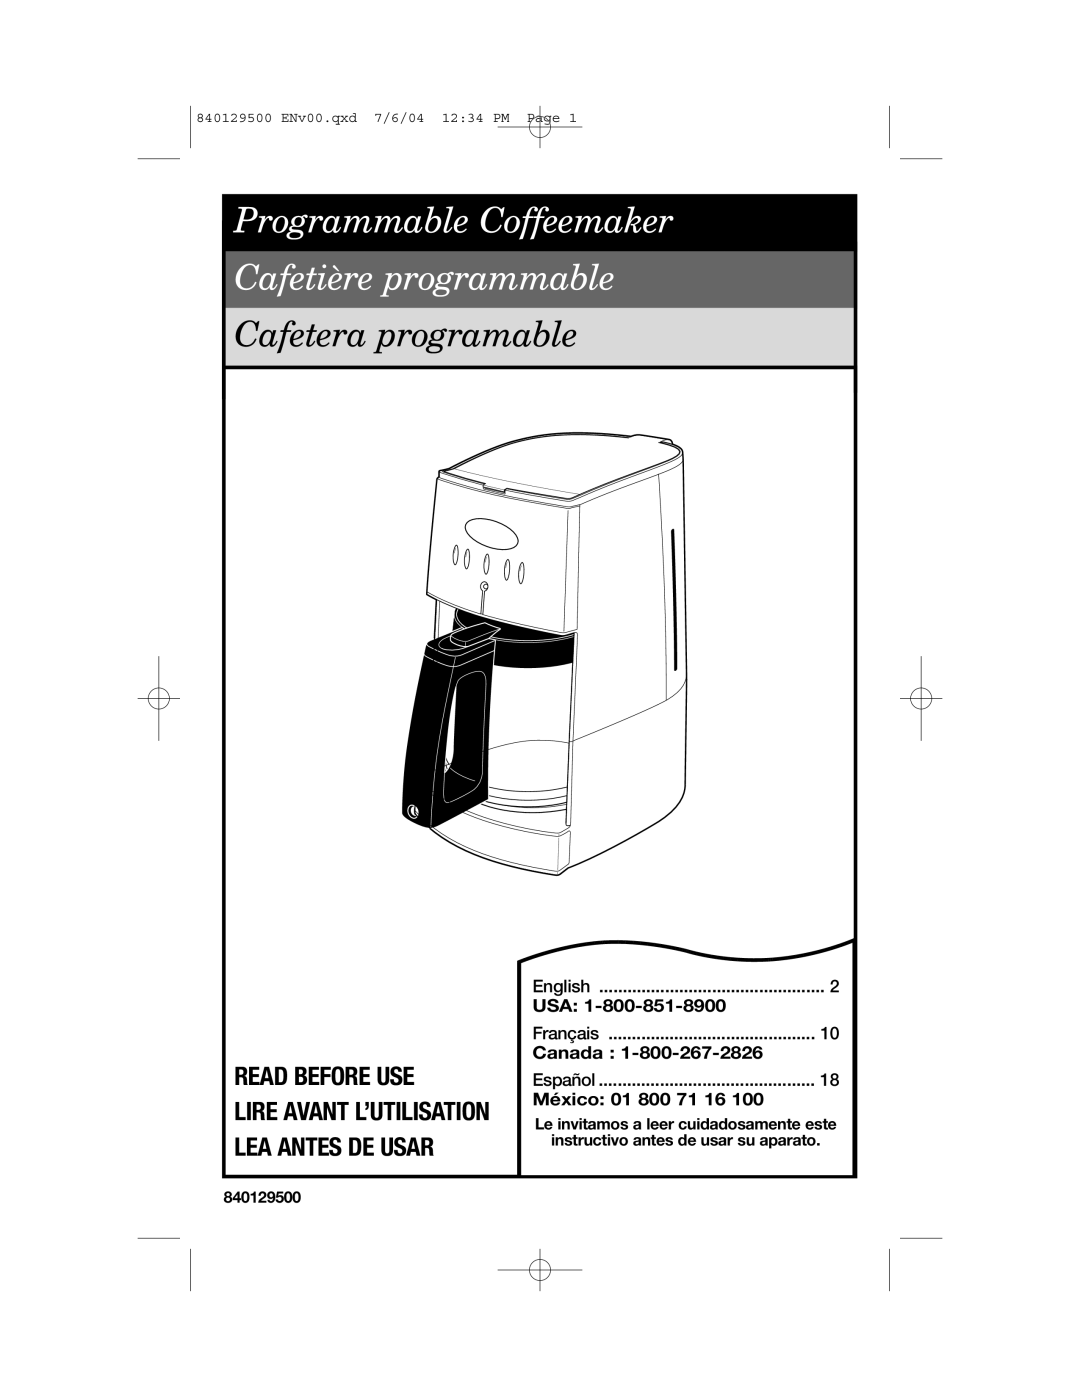 Hamilton Beach manual Read Before Use, Programmable Coffeemaker Cafetière programmable, Cafetera programable, Canada 